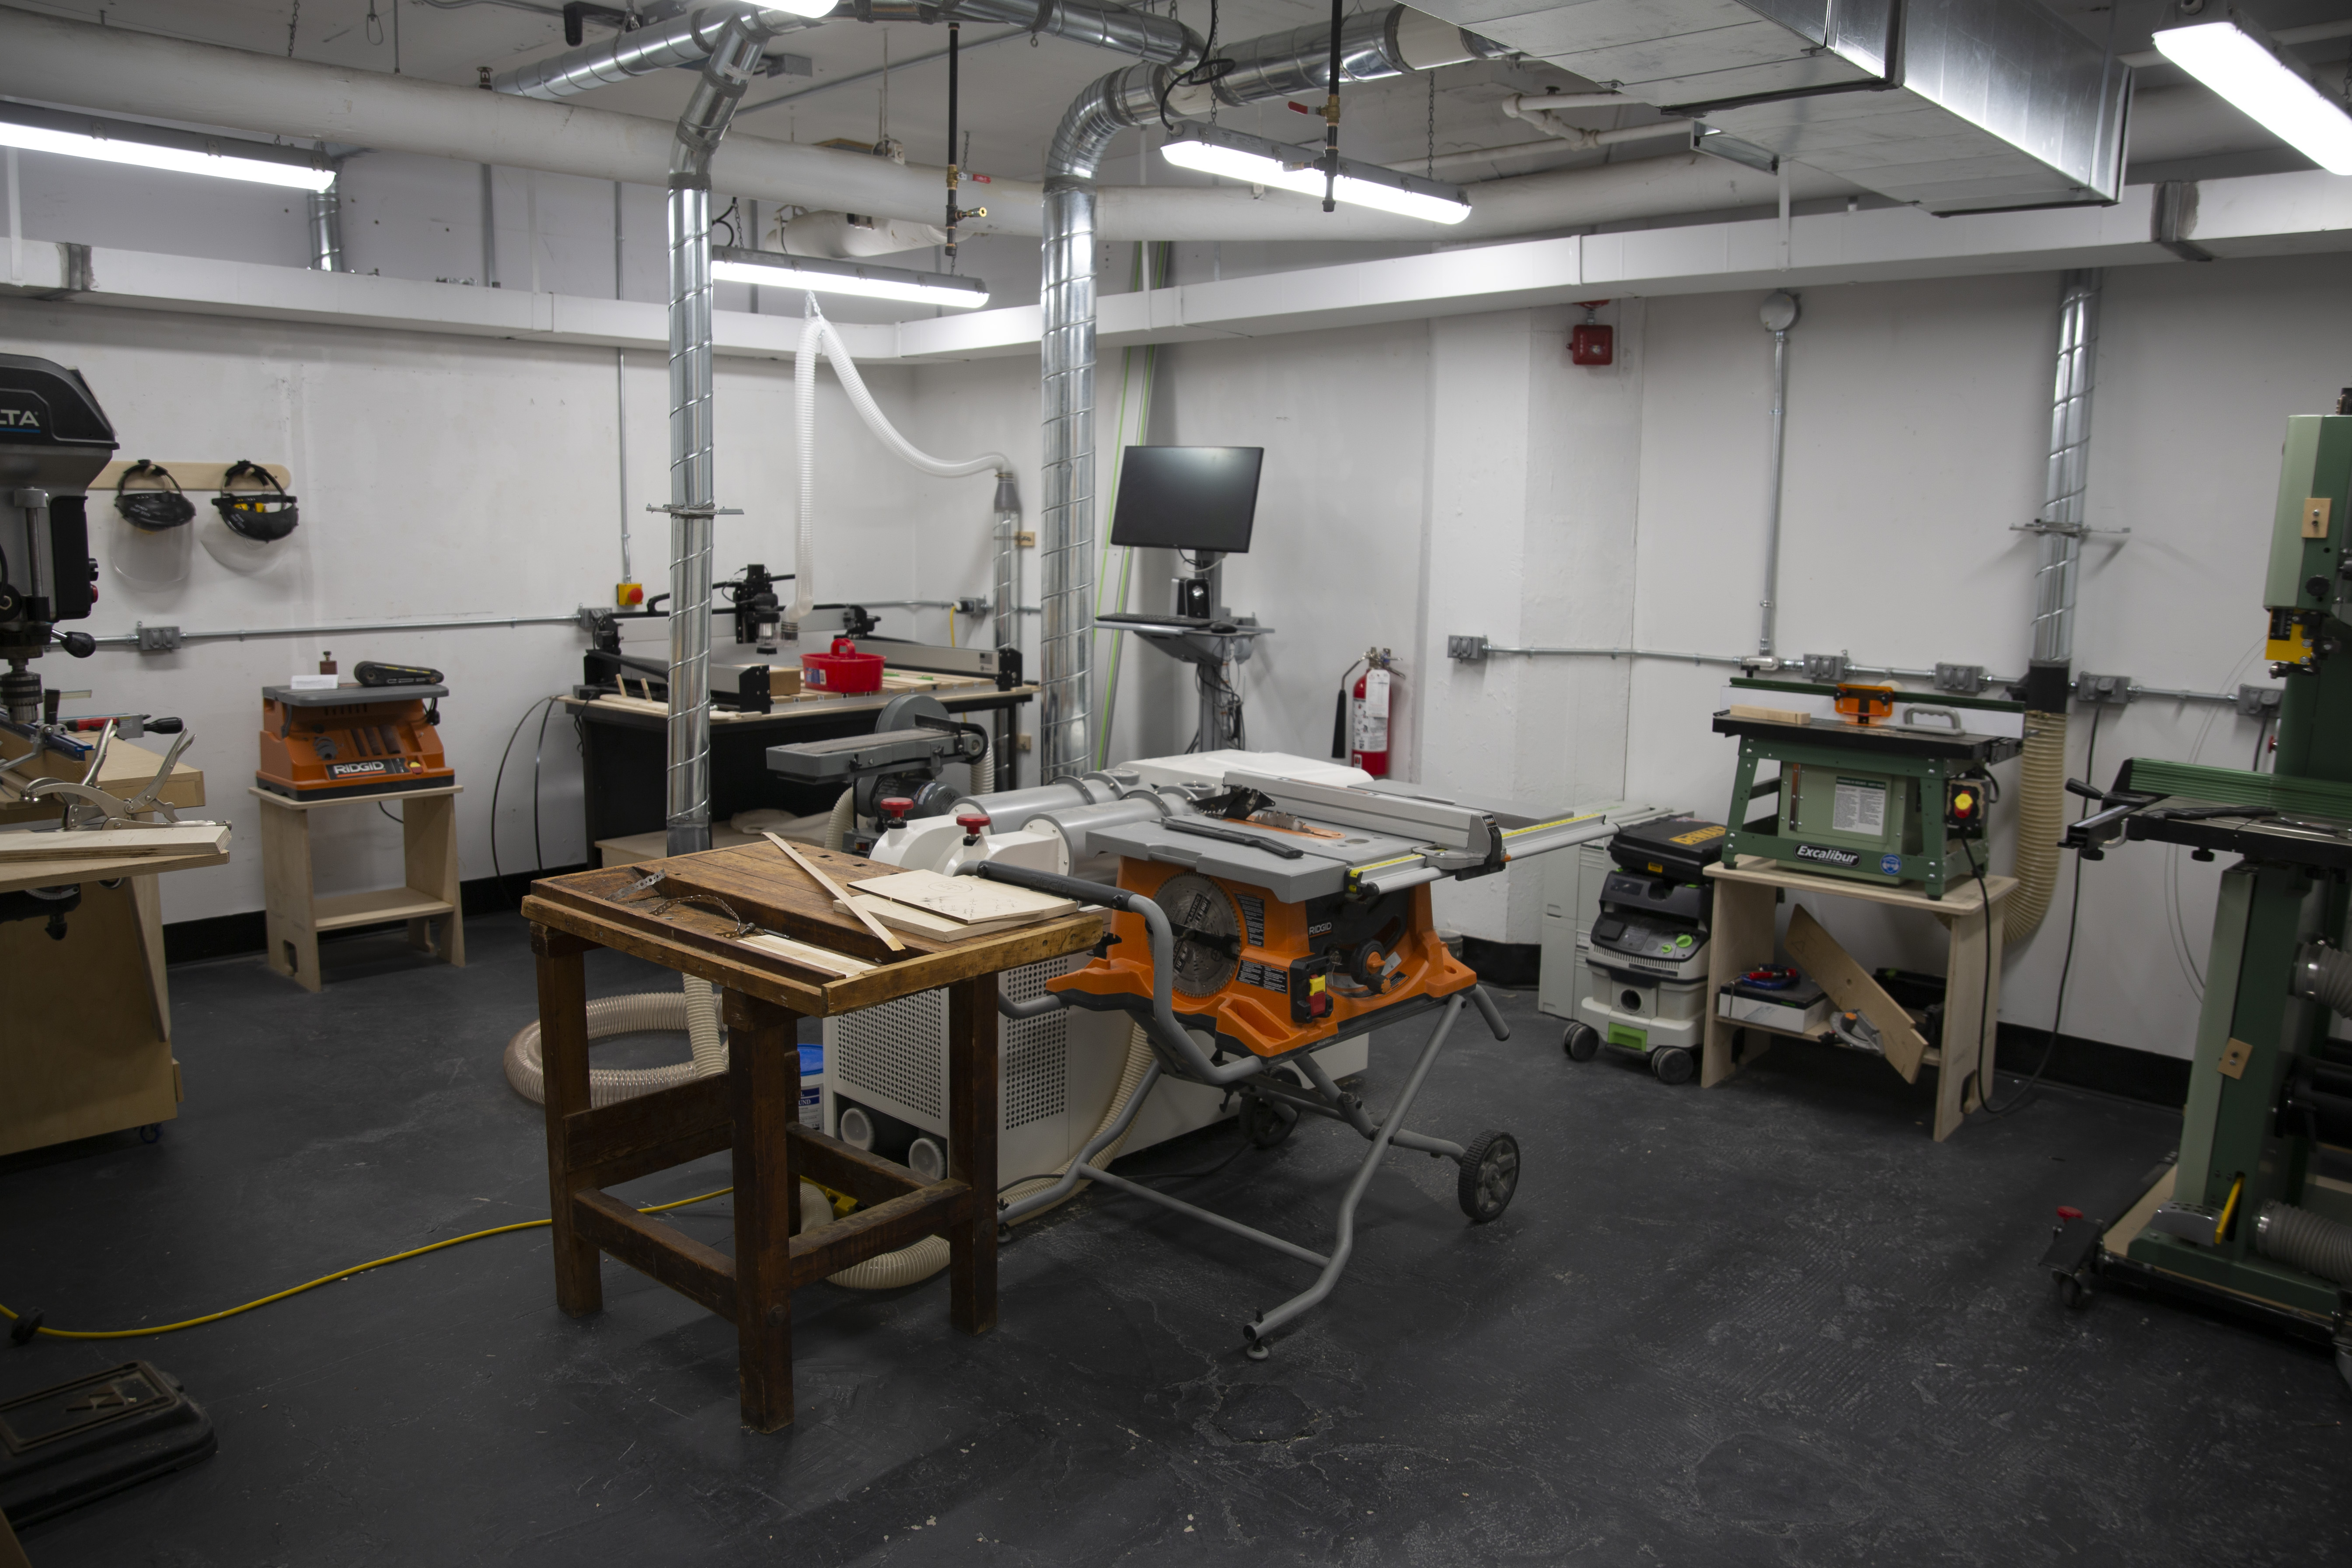 New wood shop equipment and space at the Experimental Fabrication Studio.